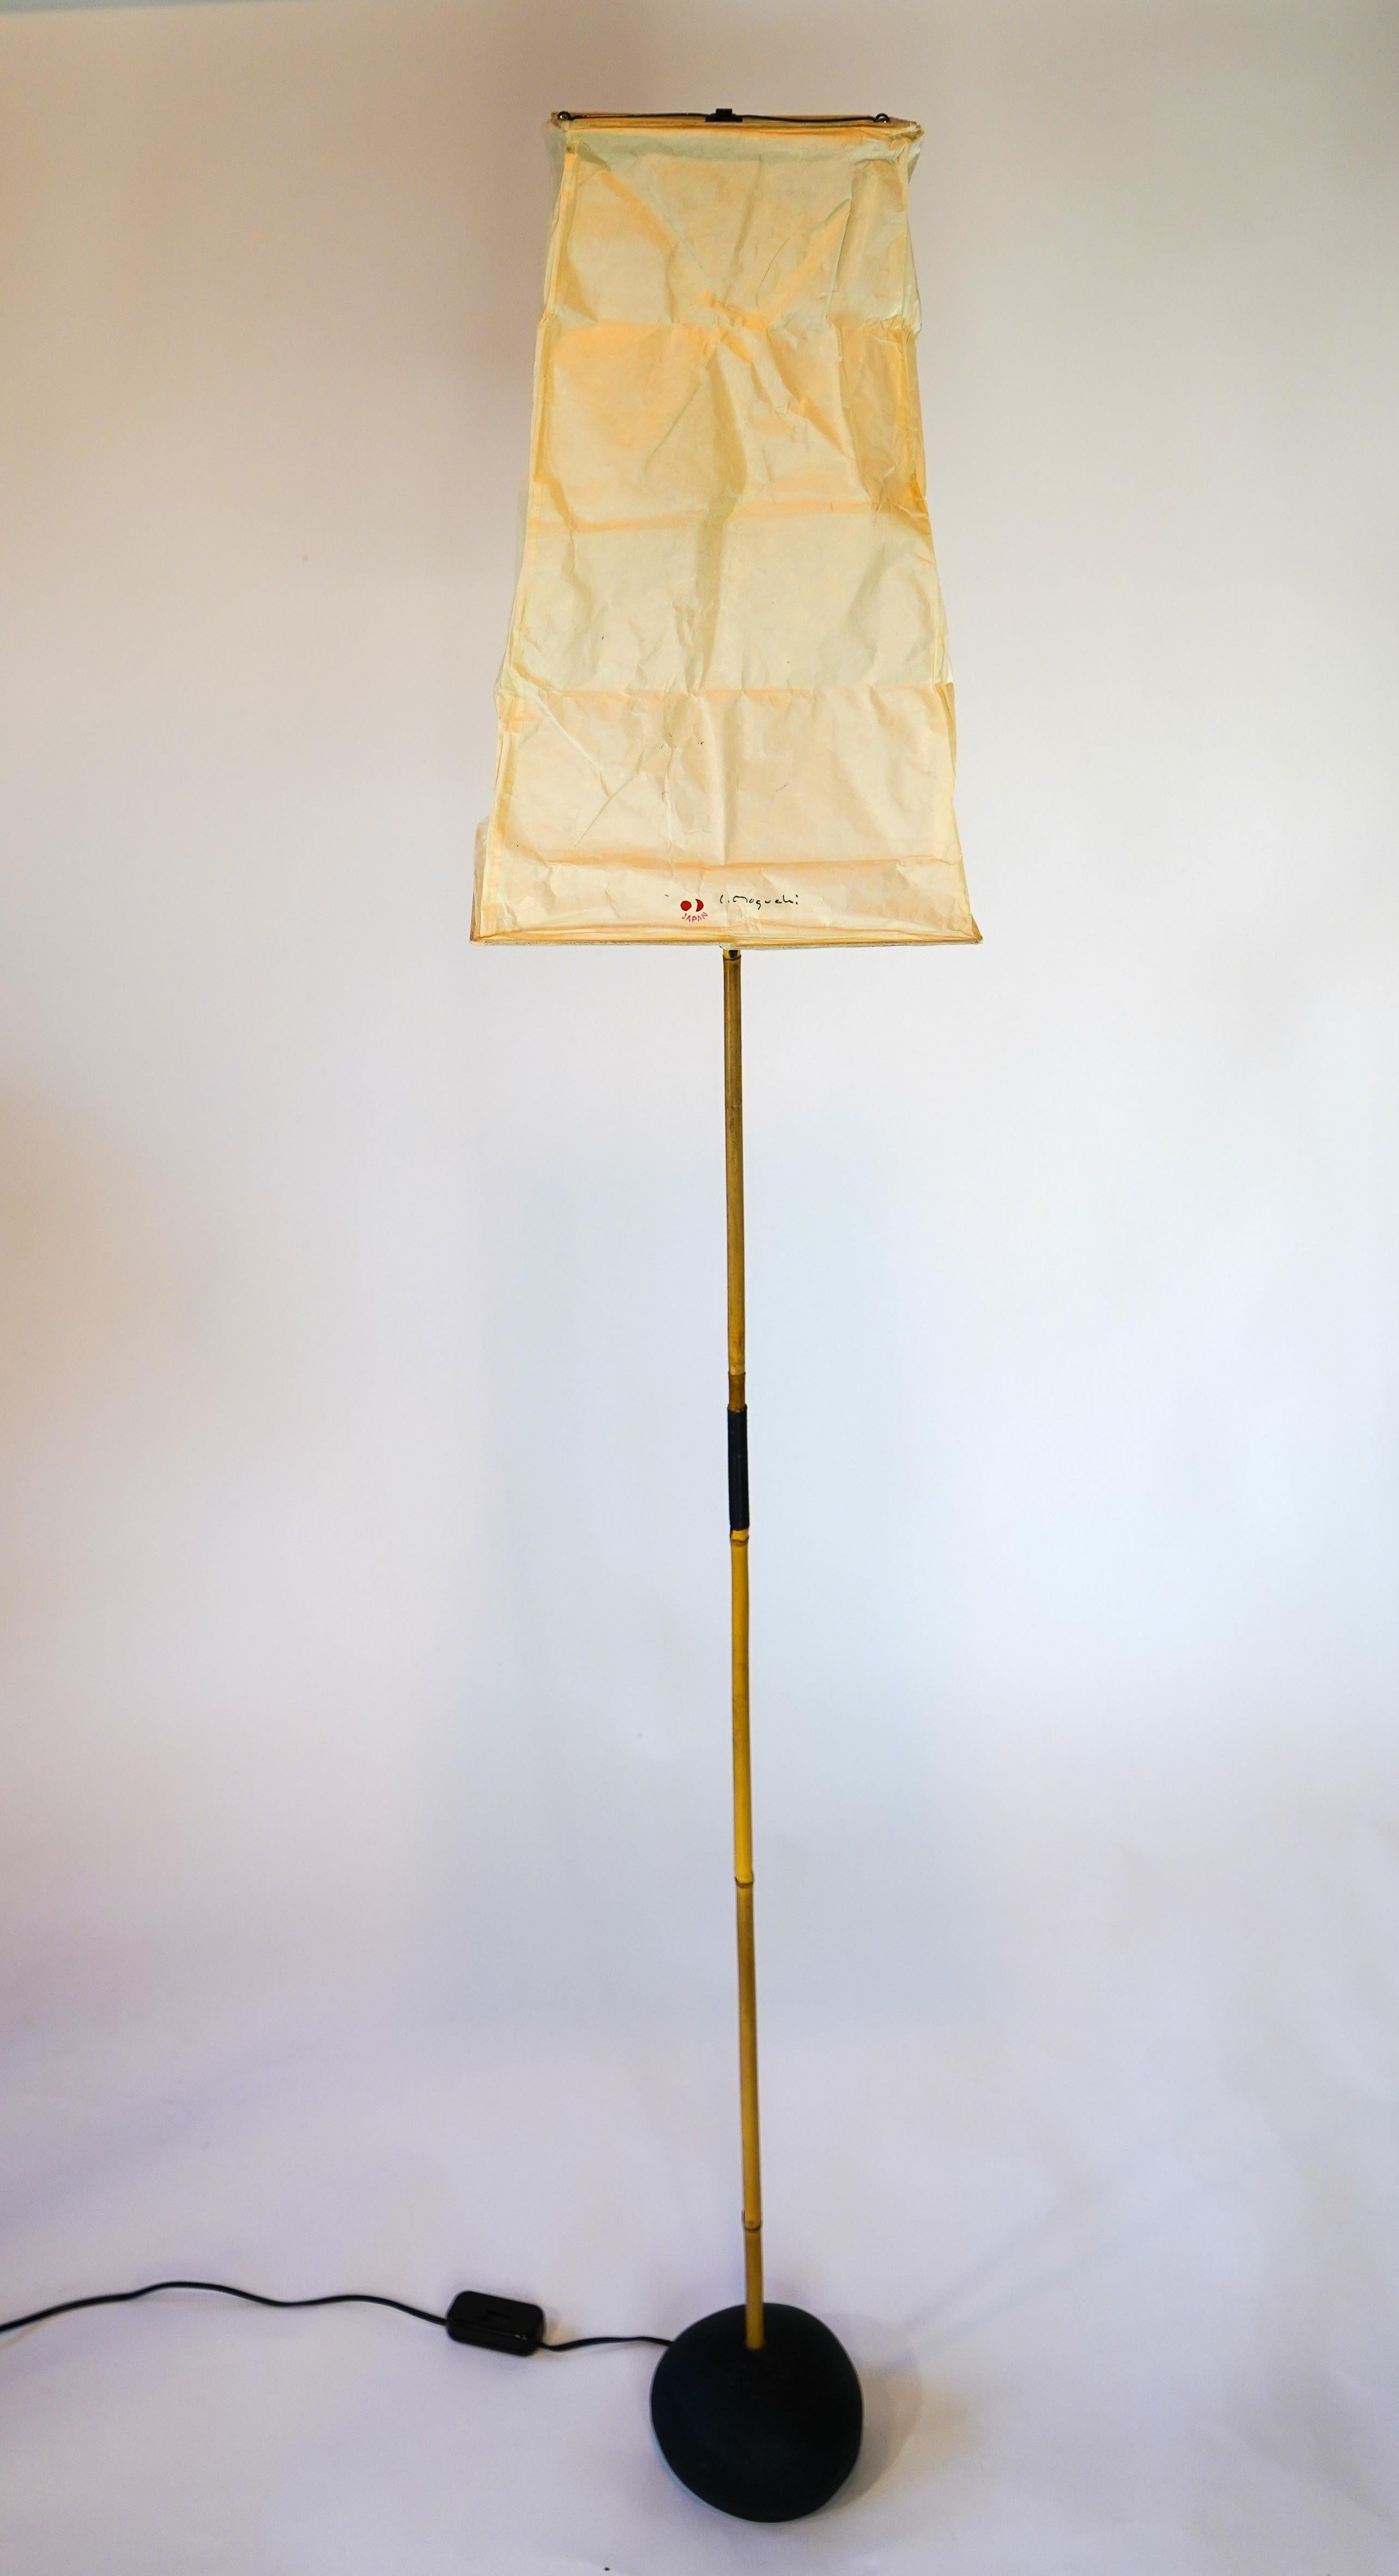 Vintage Akari floor lamp by Isamu Noguchi with V1 shade. Bamboo pole attached to iron base and rice paper shade signed. Shade is in great condition with minimal wear.